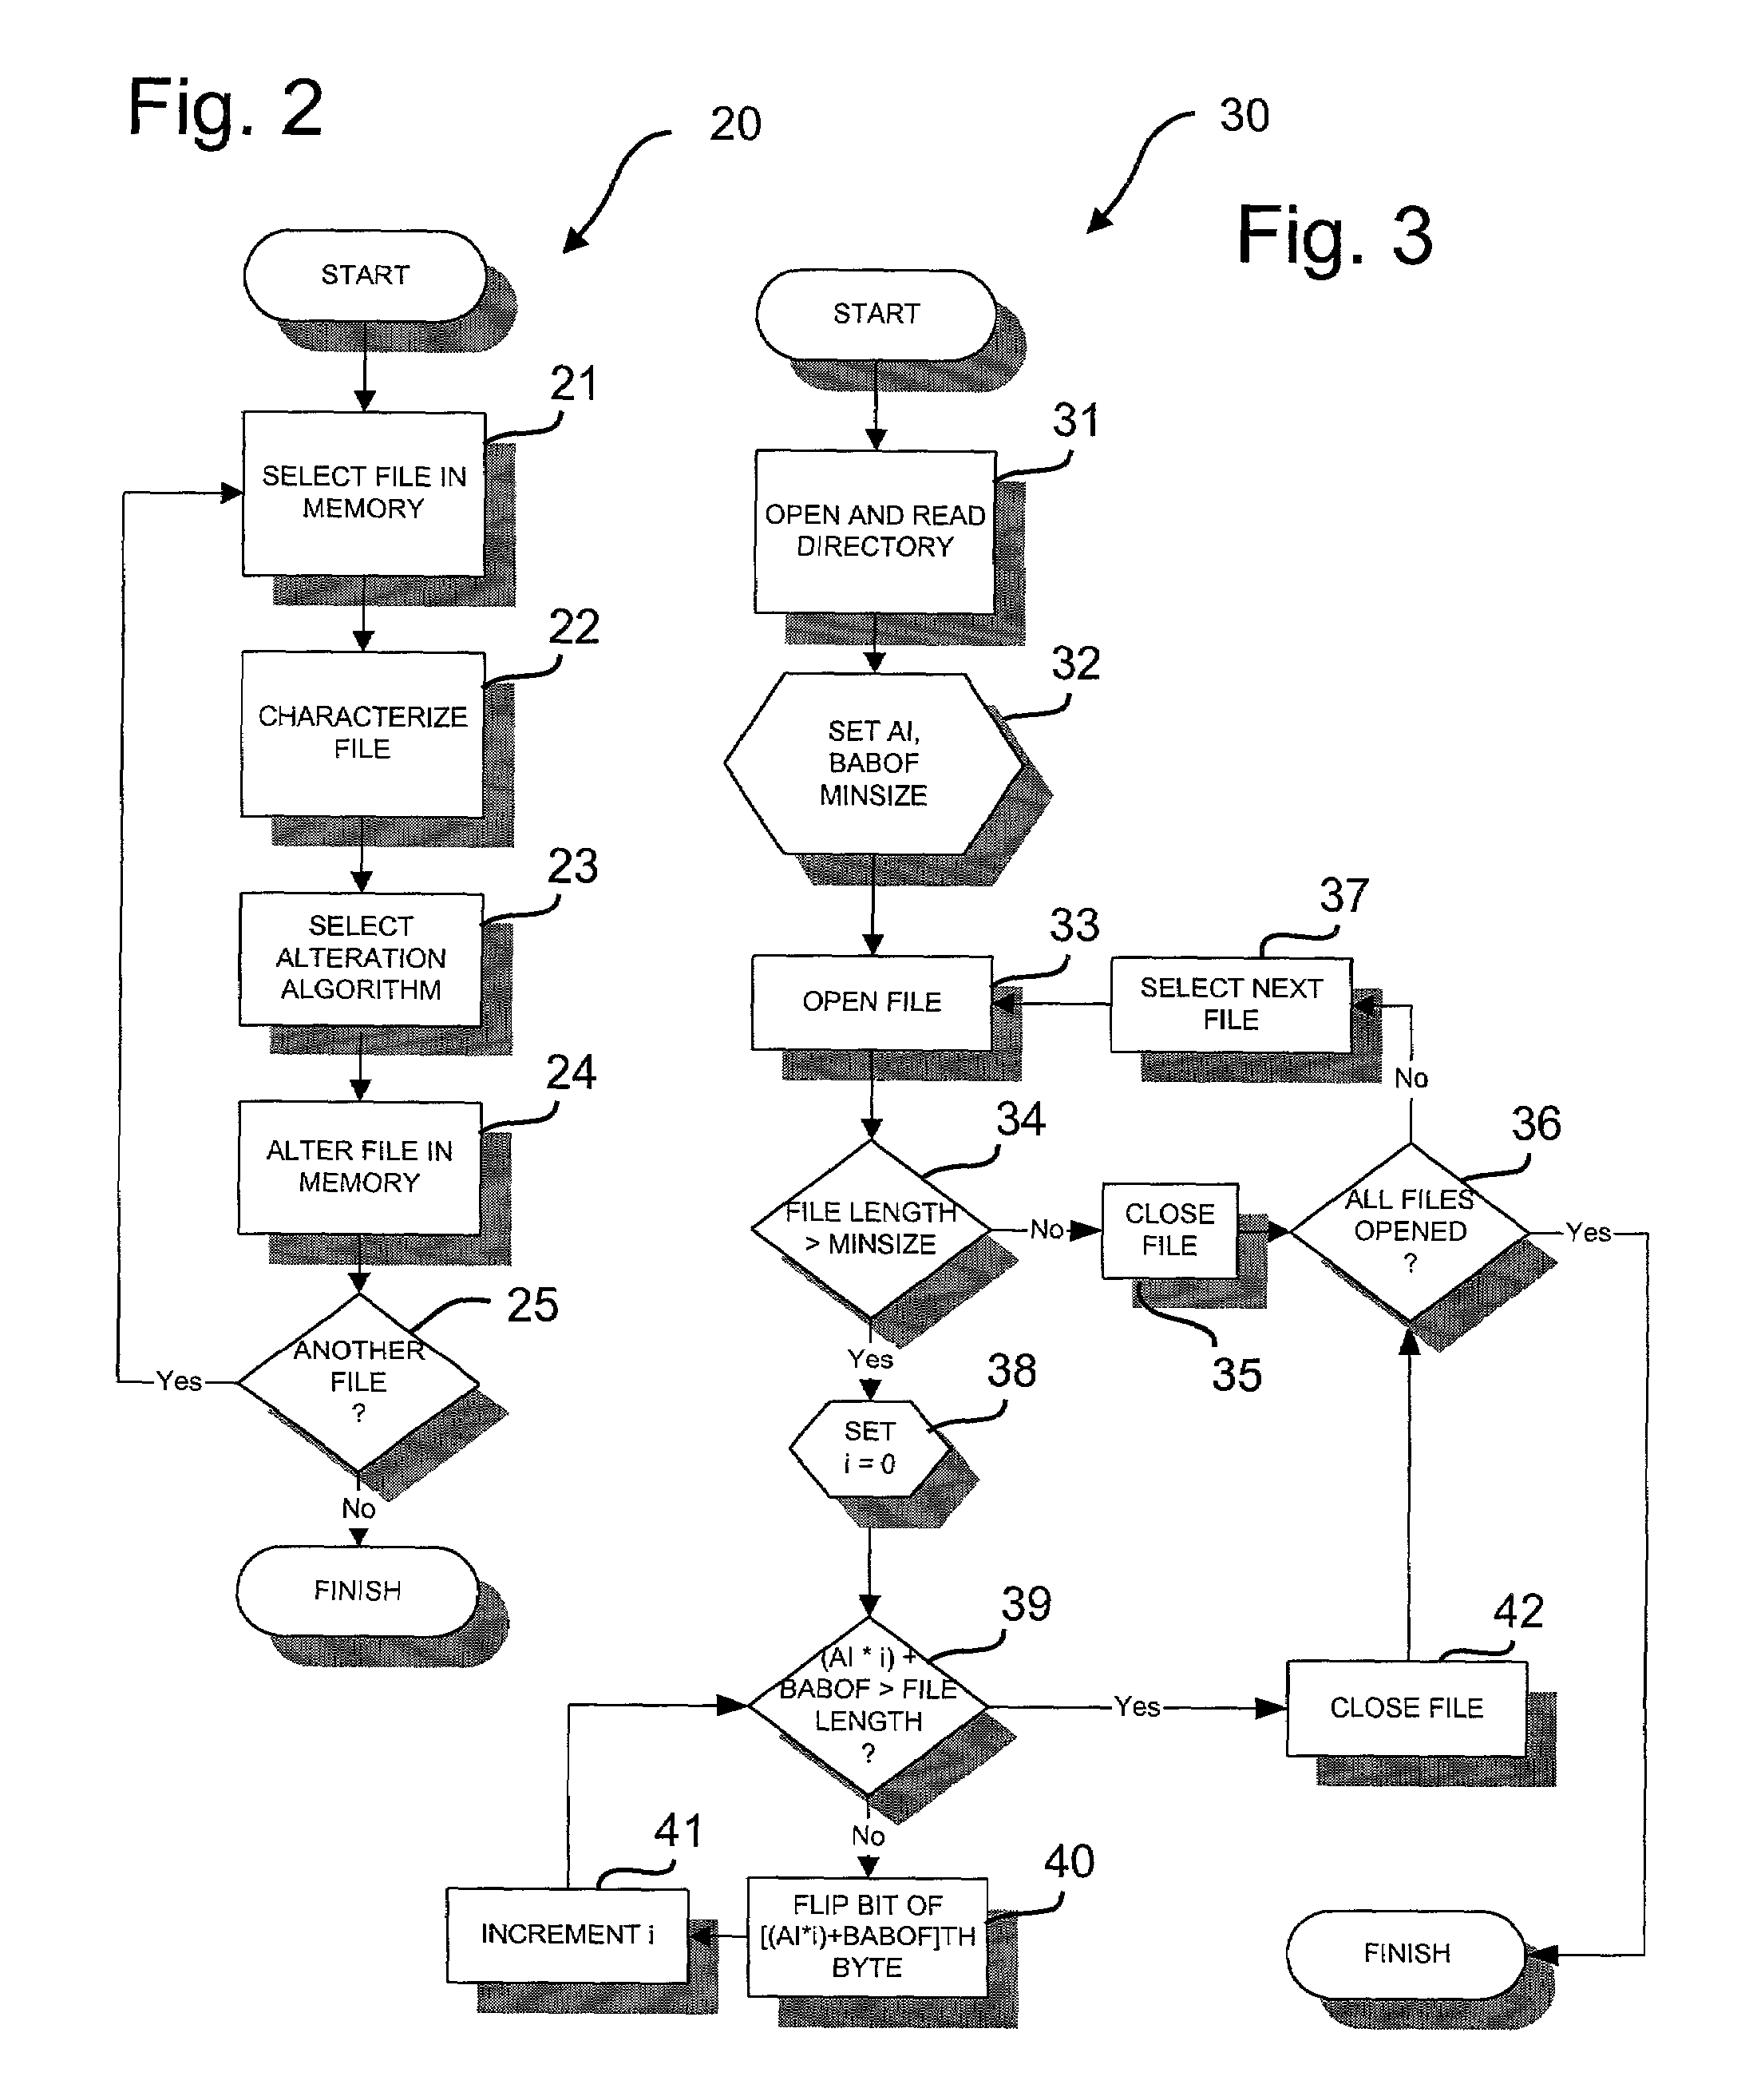 Method and system for operating a network server to discourage inappropriate use